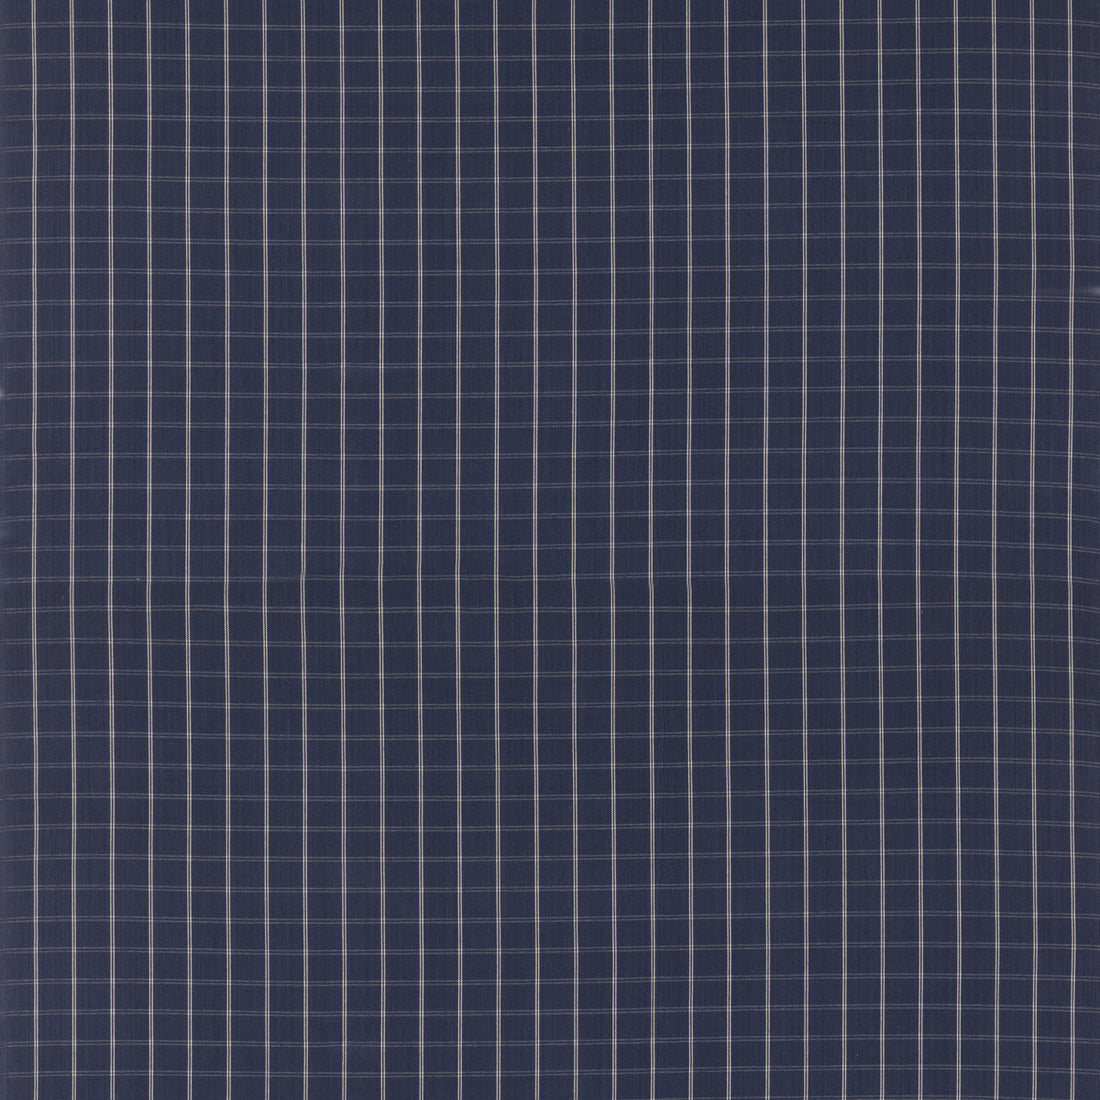 Compass Check fabric in indigo color - pattern FD816.H10.0 - by Mulberry in the Westerly Stripes collection